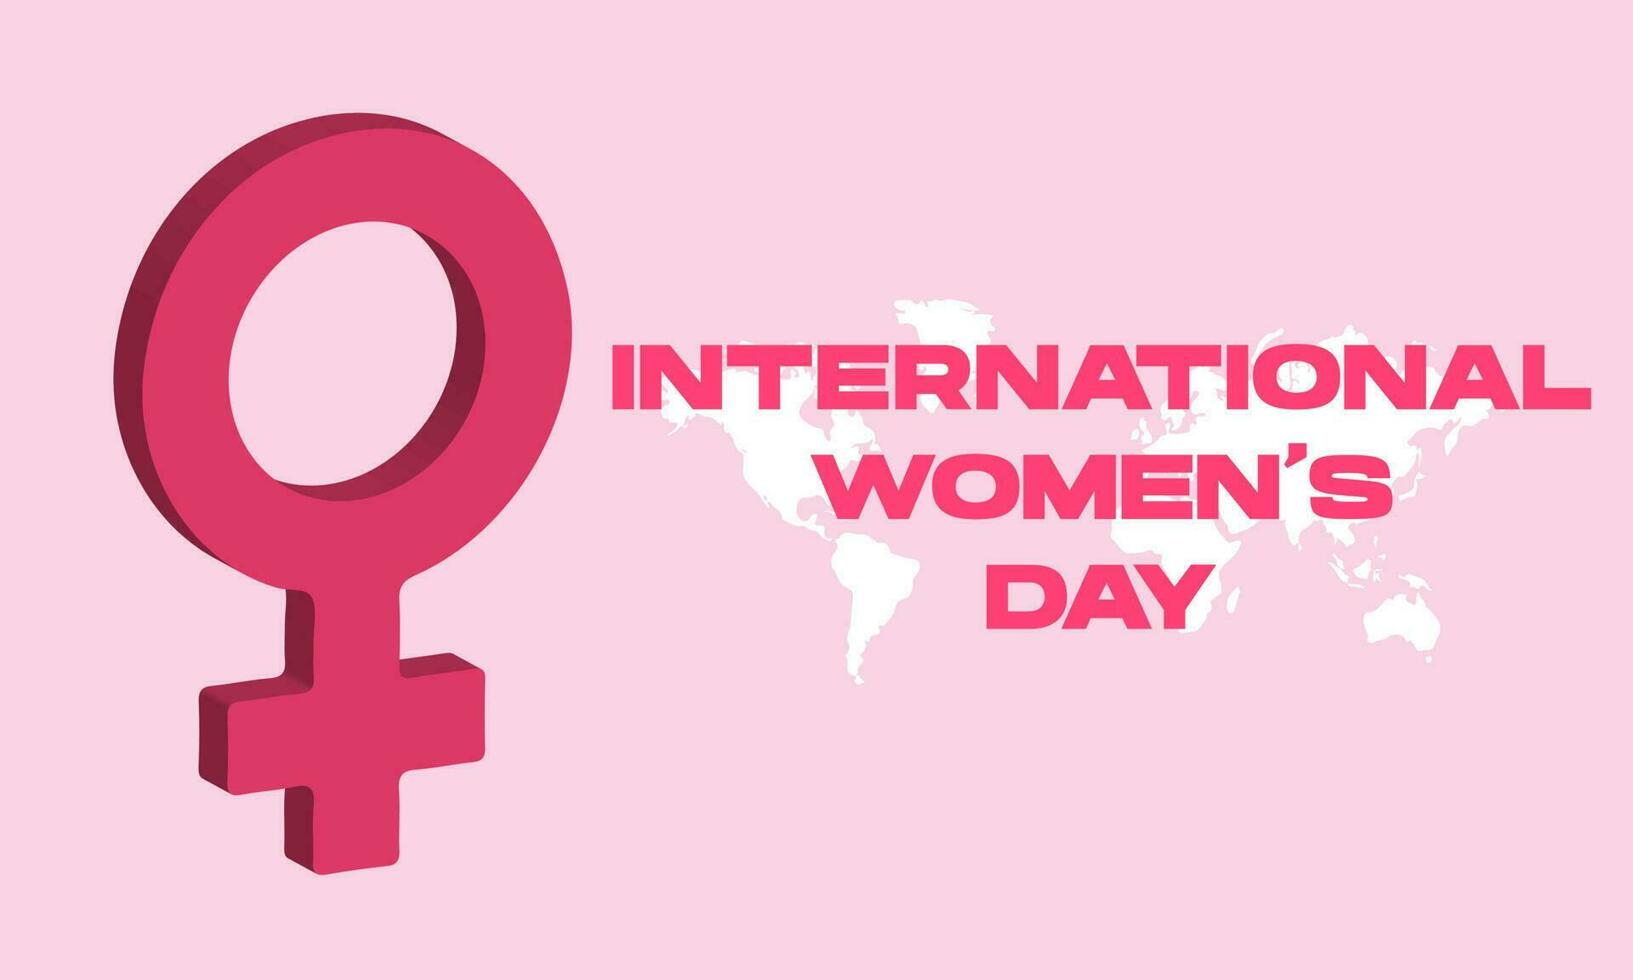 international women's day banner with women symbol on pink background. Vector illustration